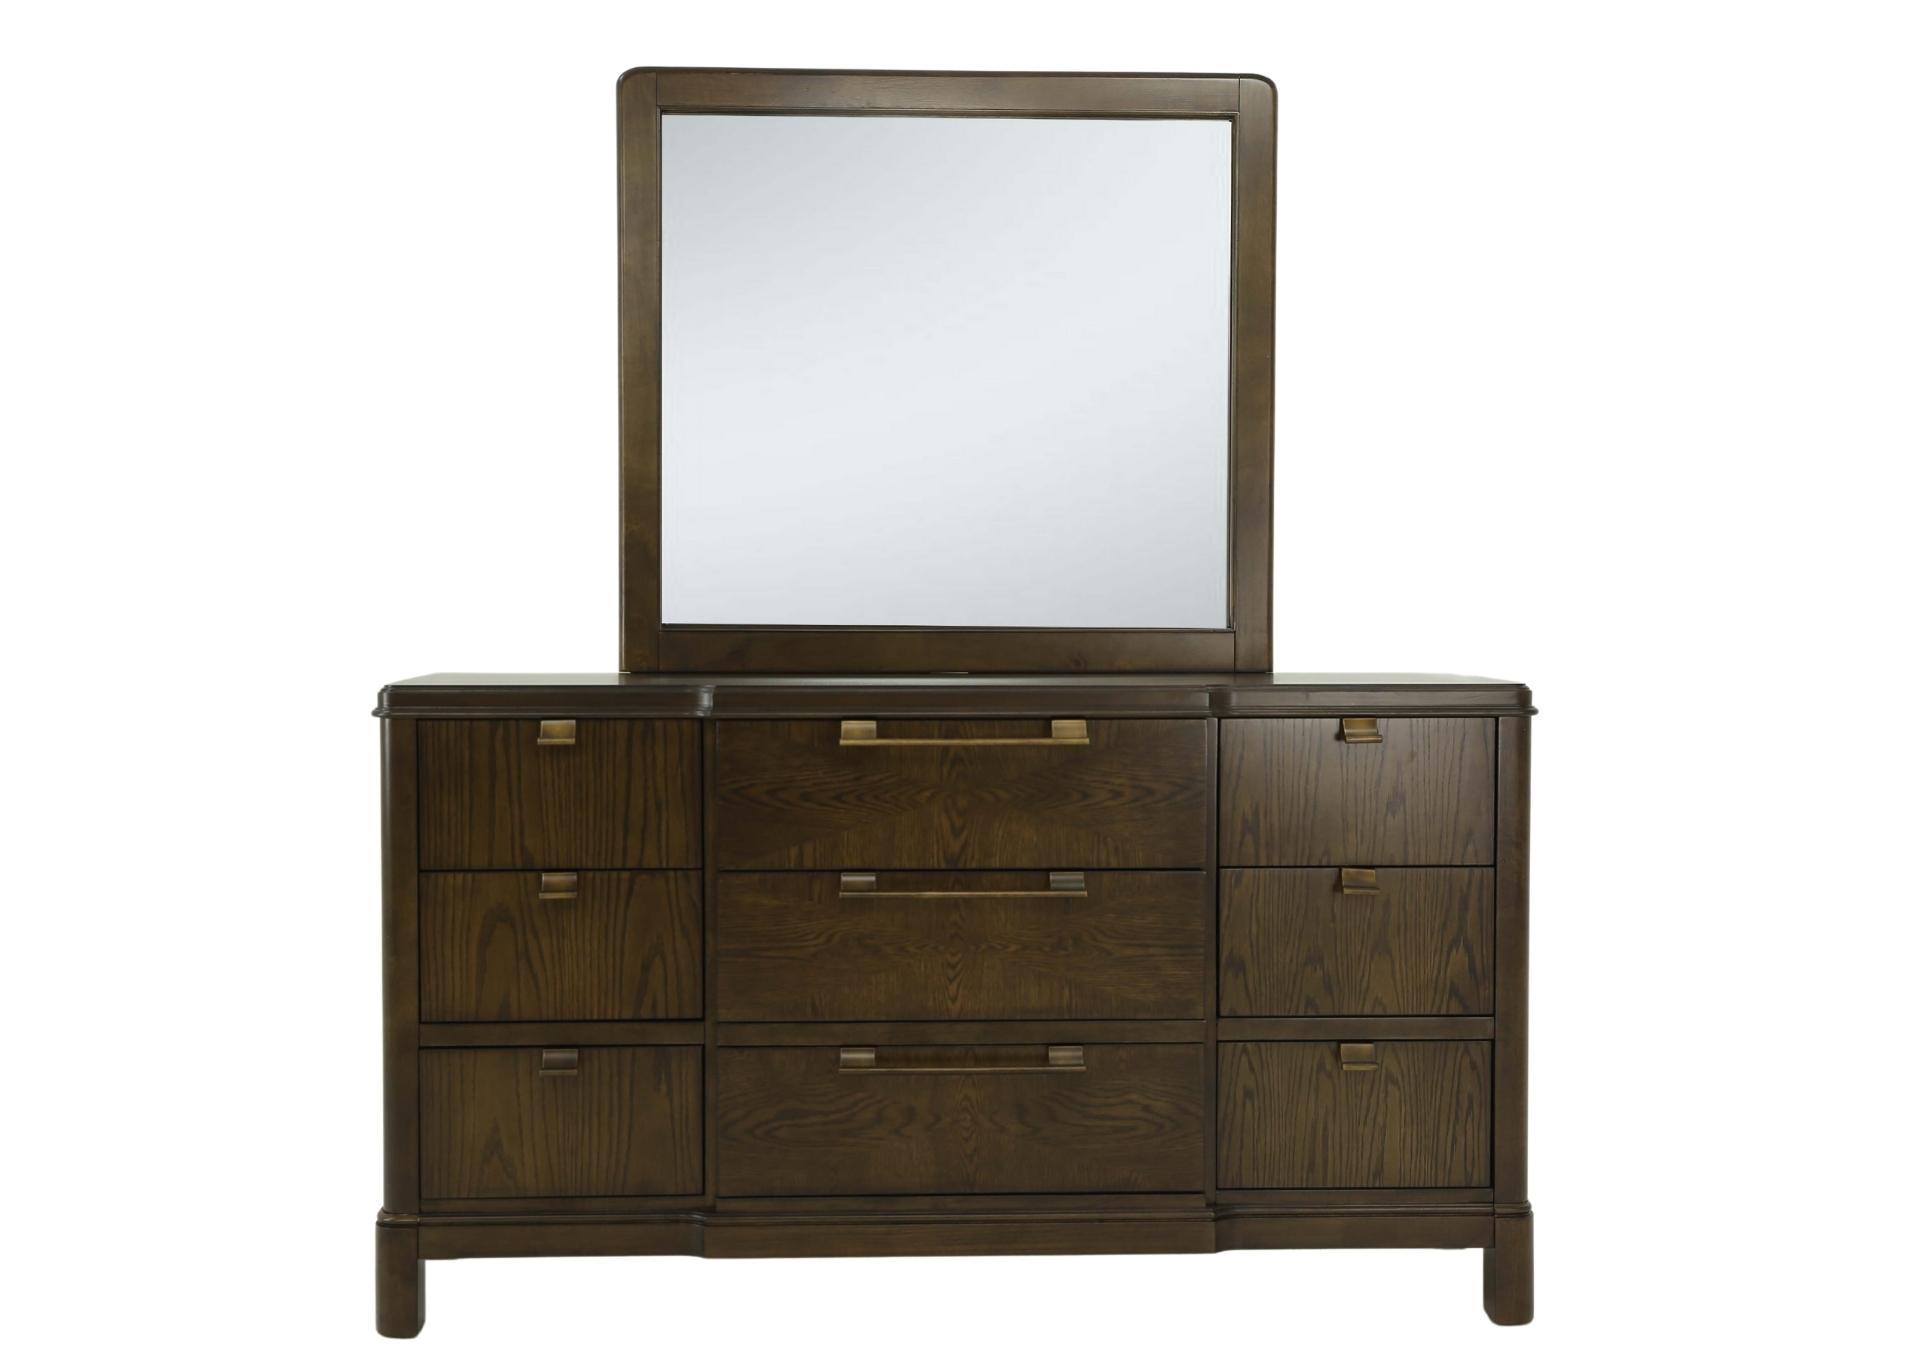 MILAN DRESSER AND MIRROR,STEVE SILVER COMPANY